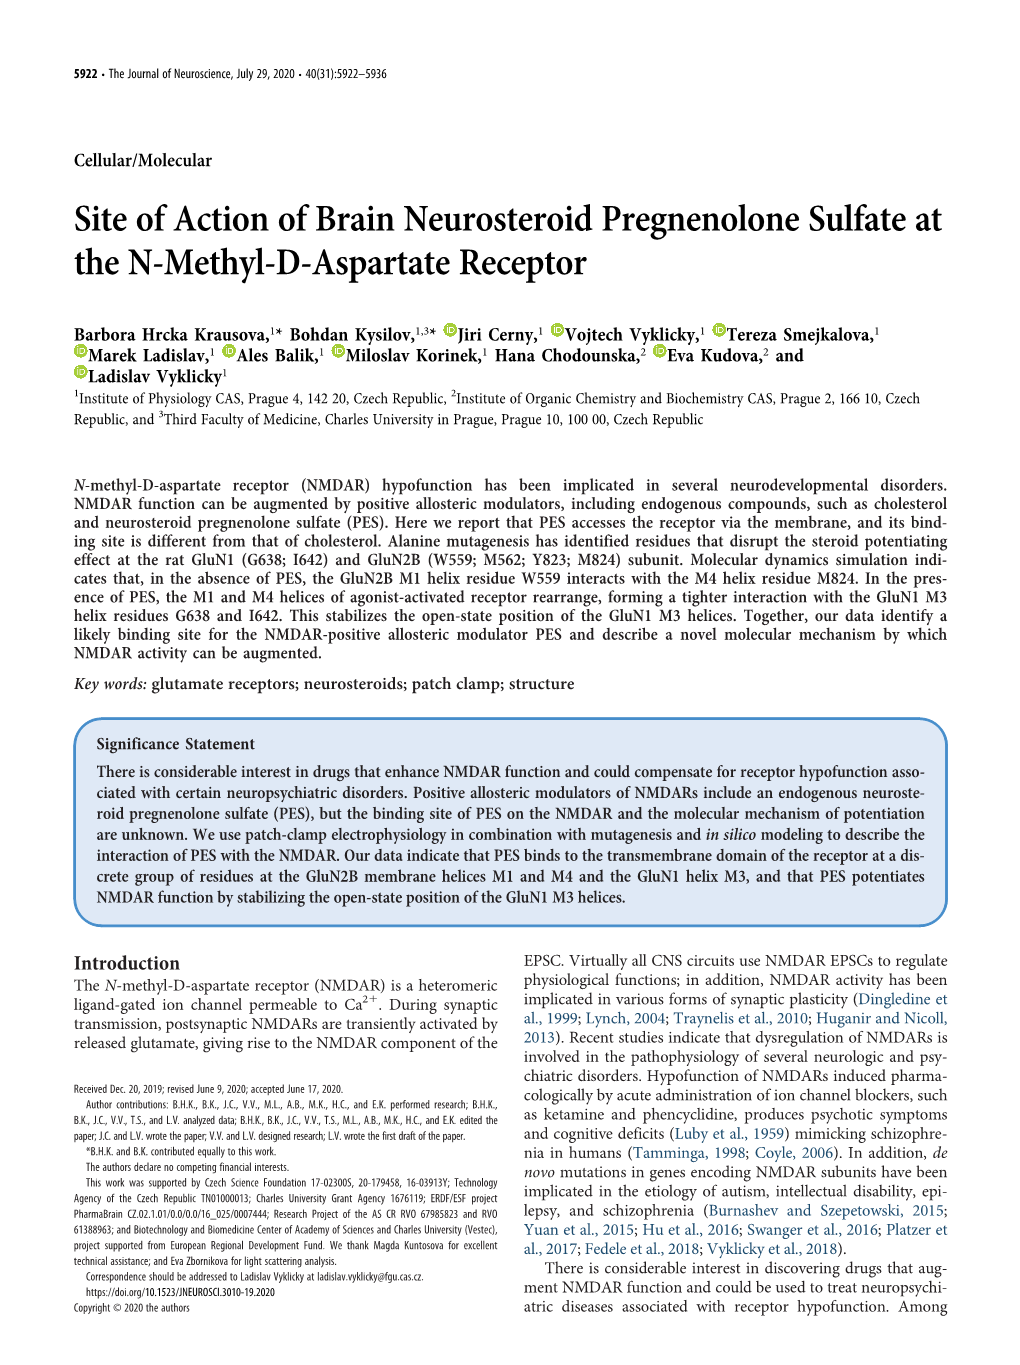 Site of Action of Brain Neurosteroid Pregnenolone Sulfate at the N-Methyl-D-Aspartate Receptor